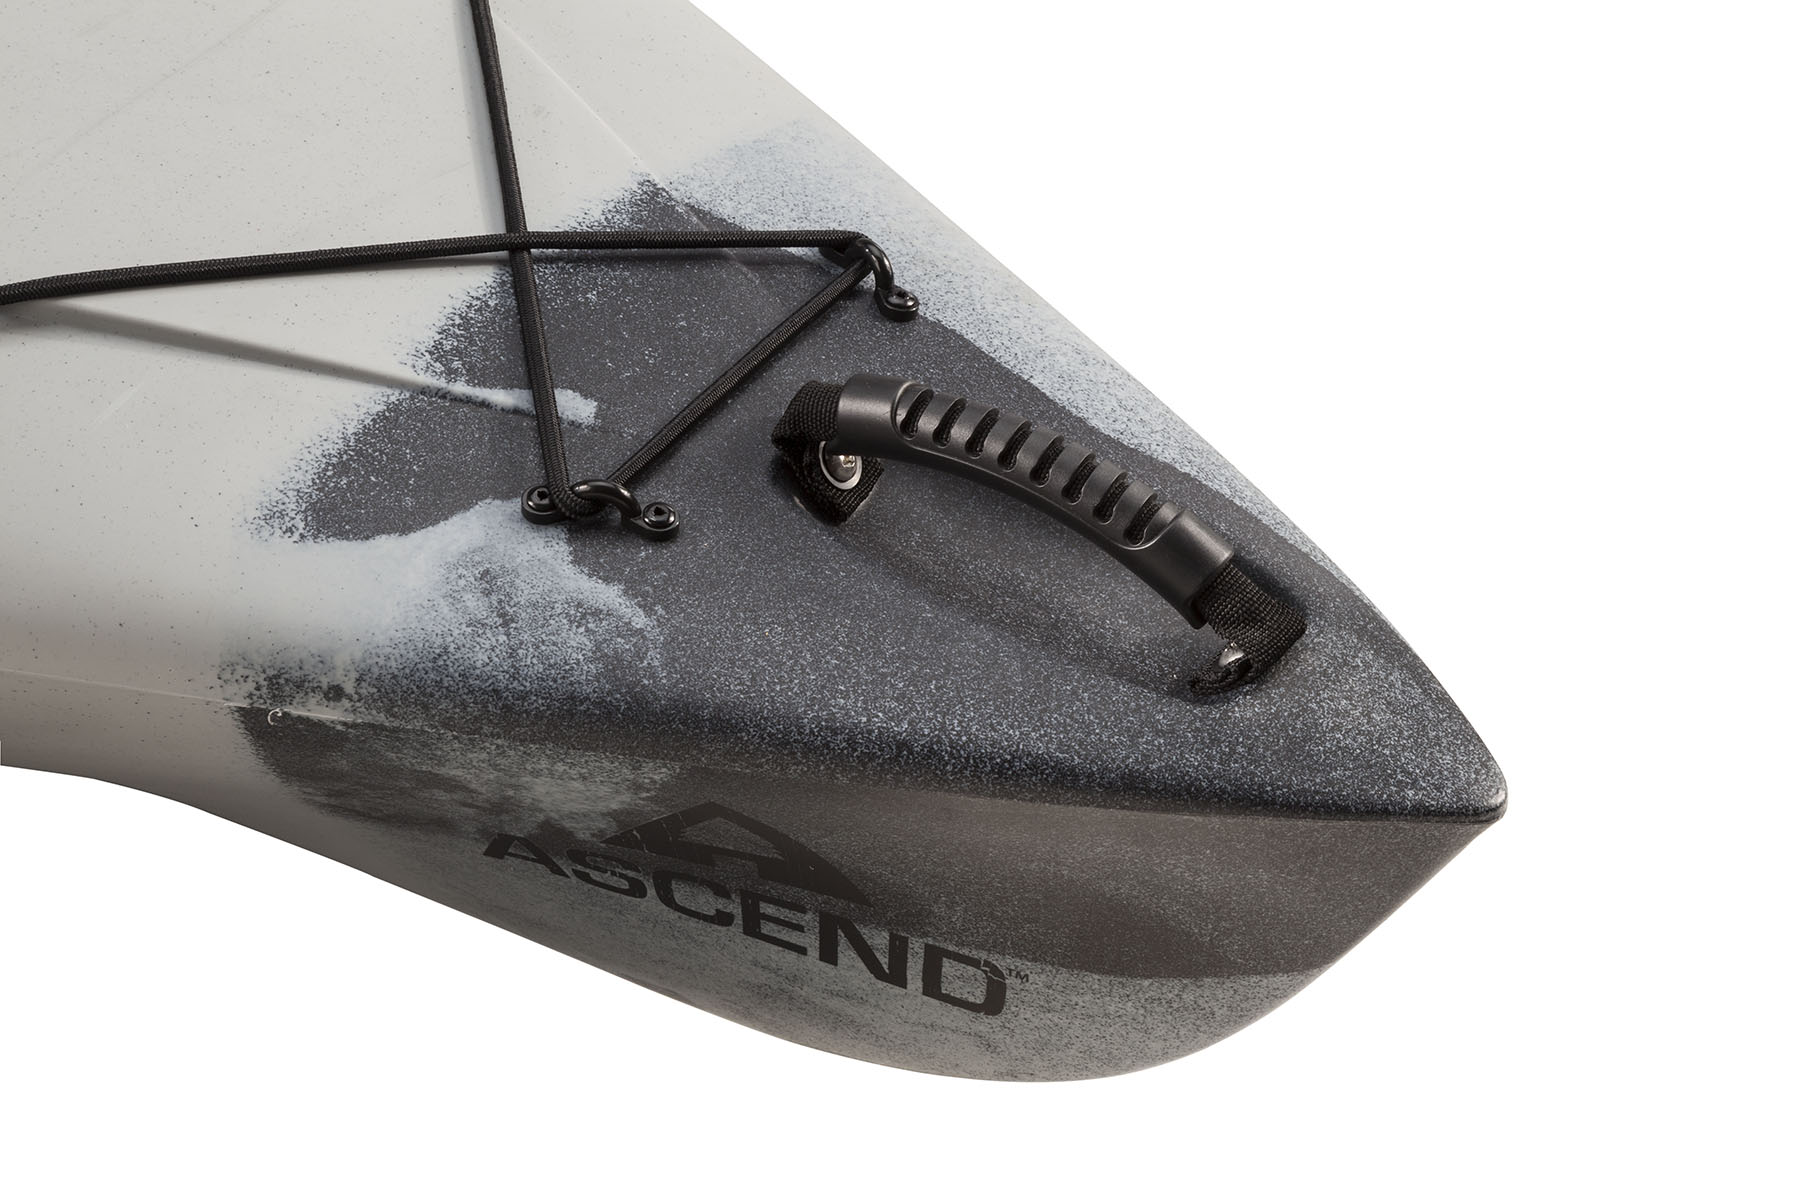 Rigging an Ascend FS10 Sit-In Kayak for Fishing - YakAttack